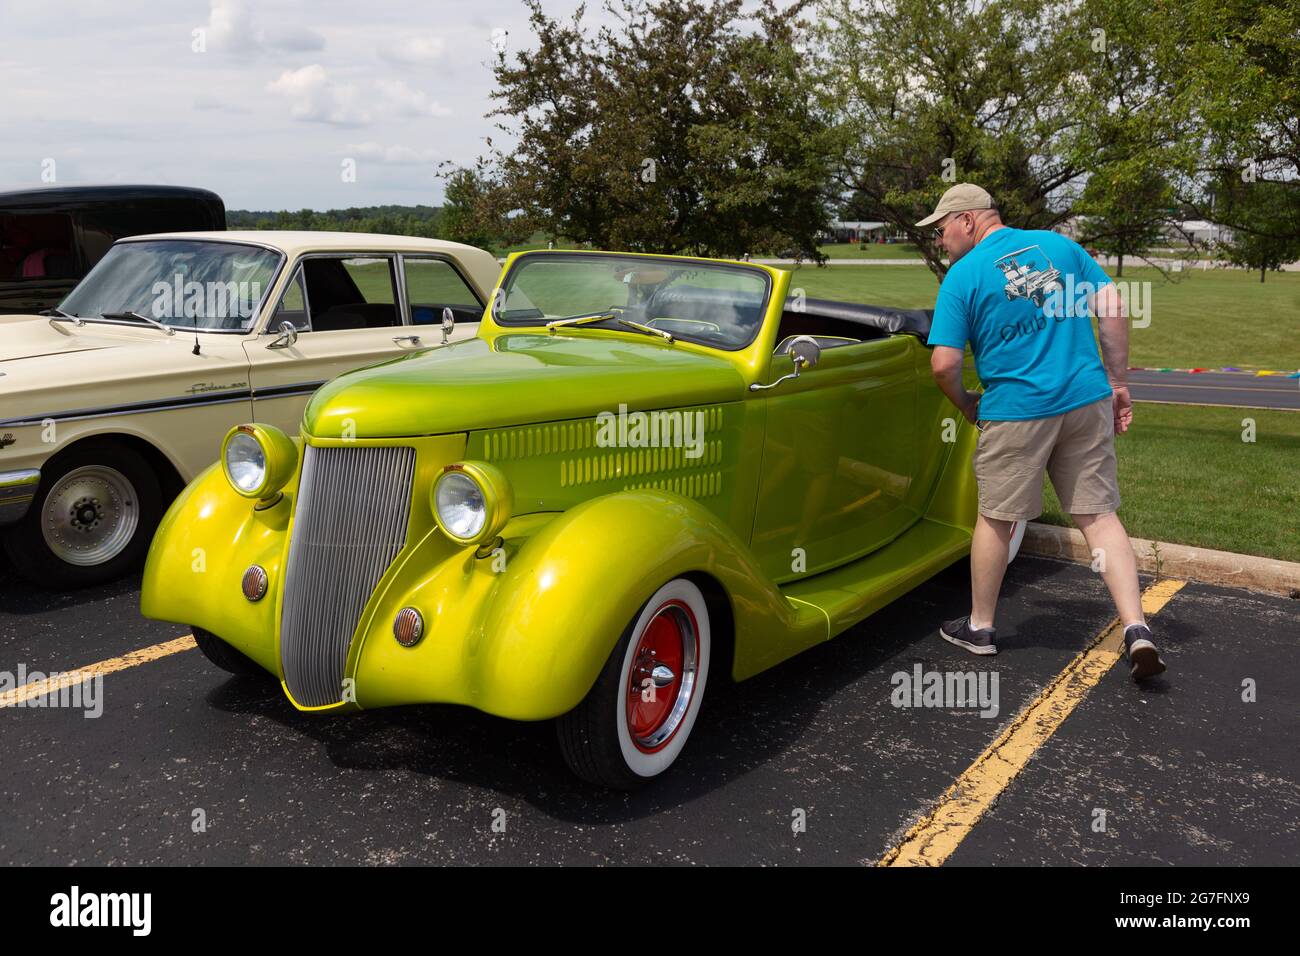 A man inspects a chartreus yellow 1936 Ford Cabriolet roadster on display at a car show in Angola, Indiana, USA. Stock Photo